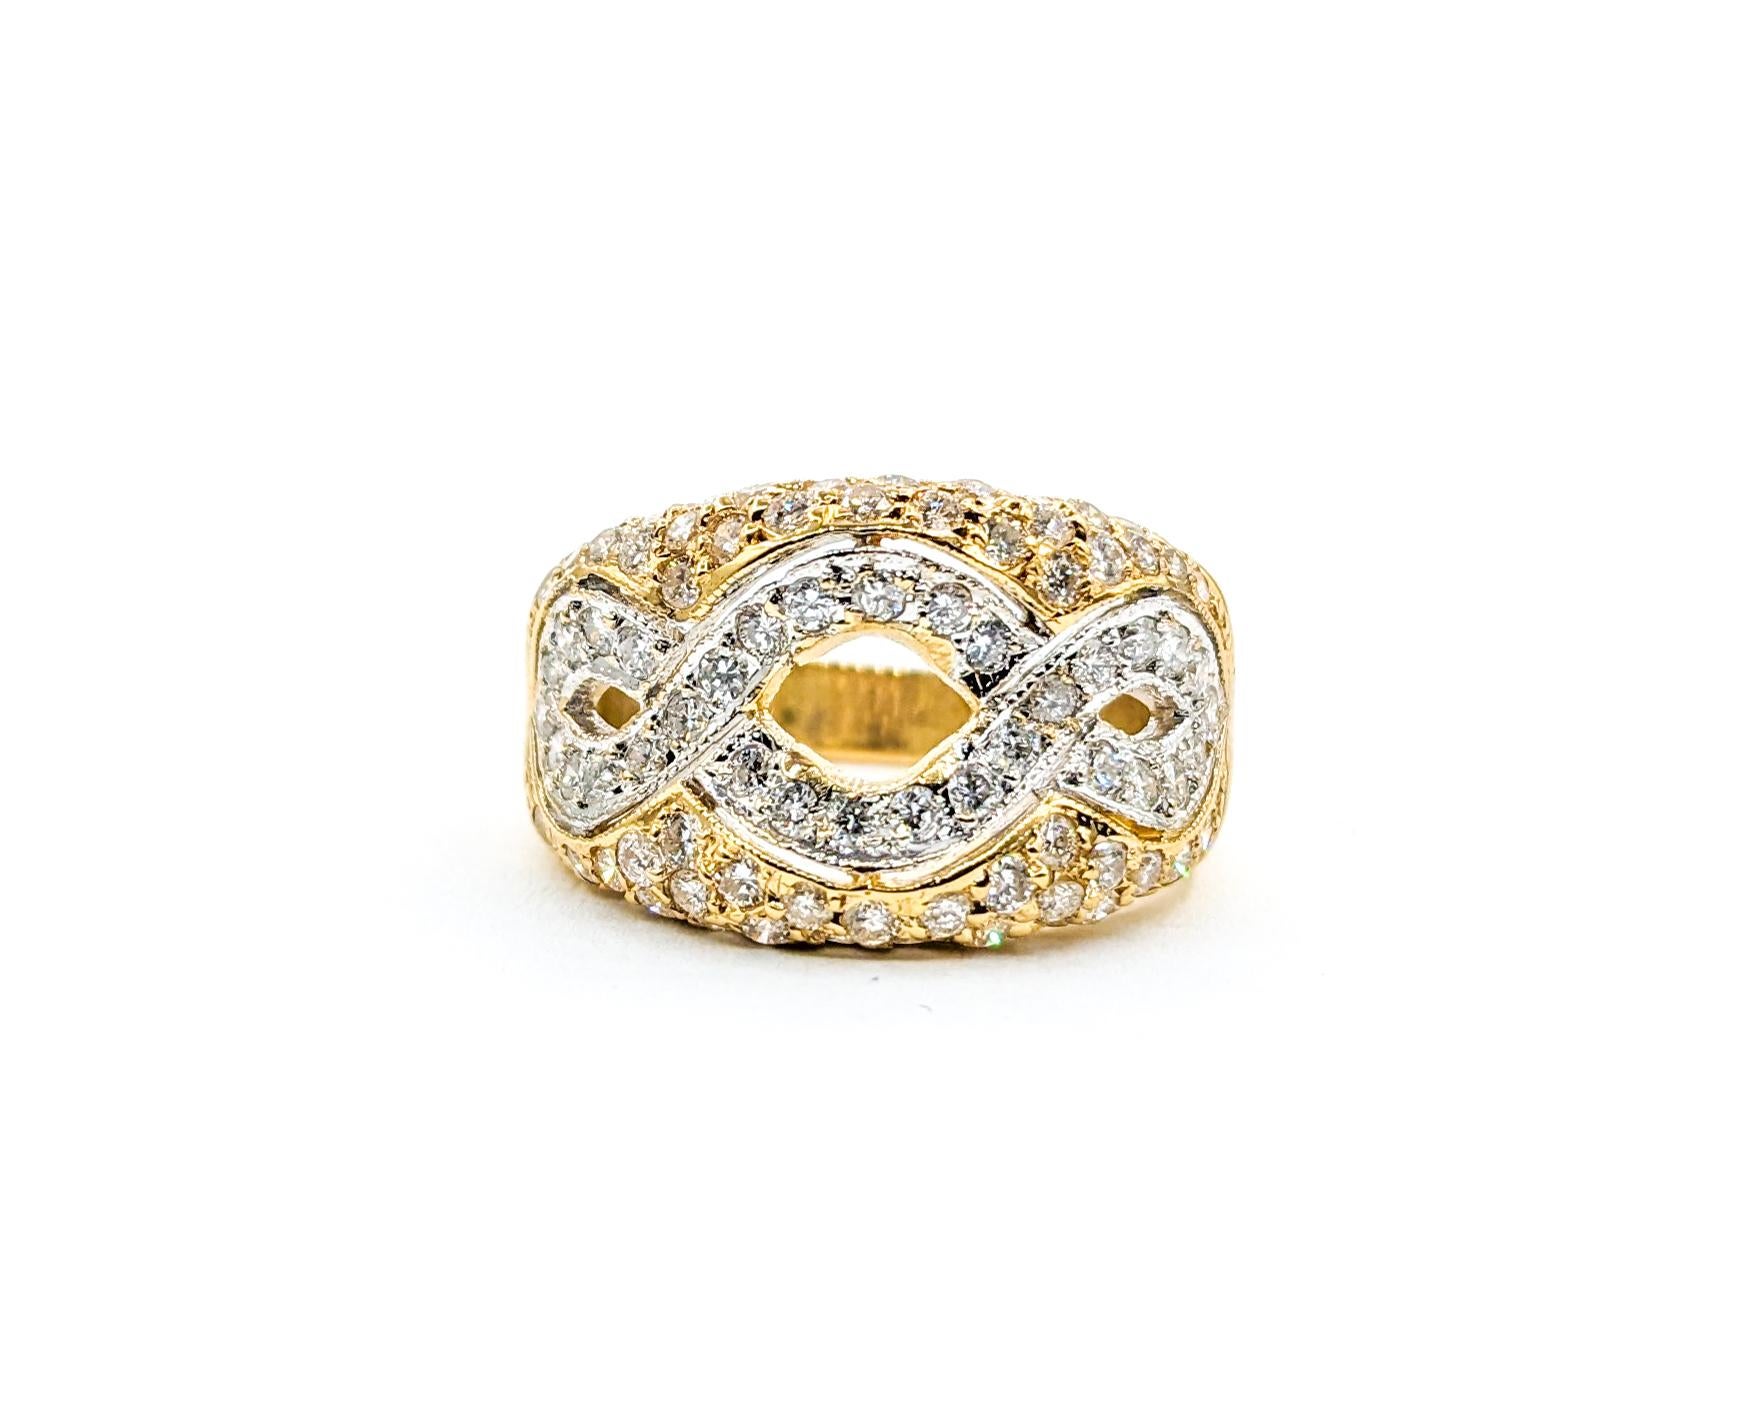 1ctw Diamond Ring In Two-Tone Gold In Excellent Condition For Sale In Bloomington, MN